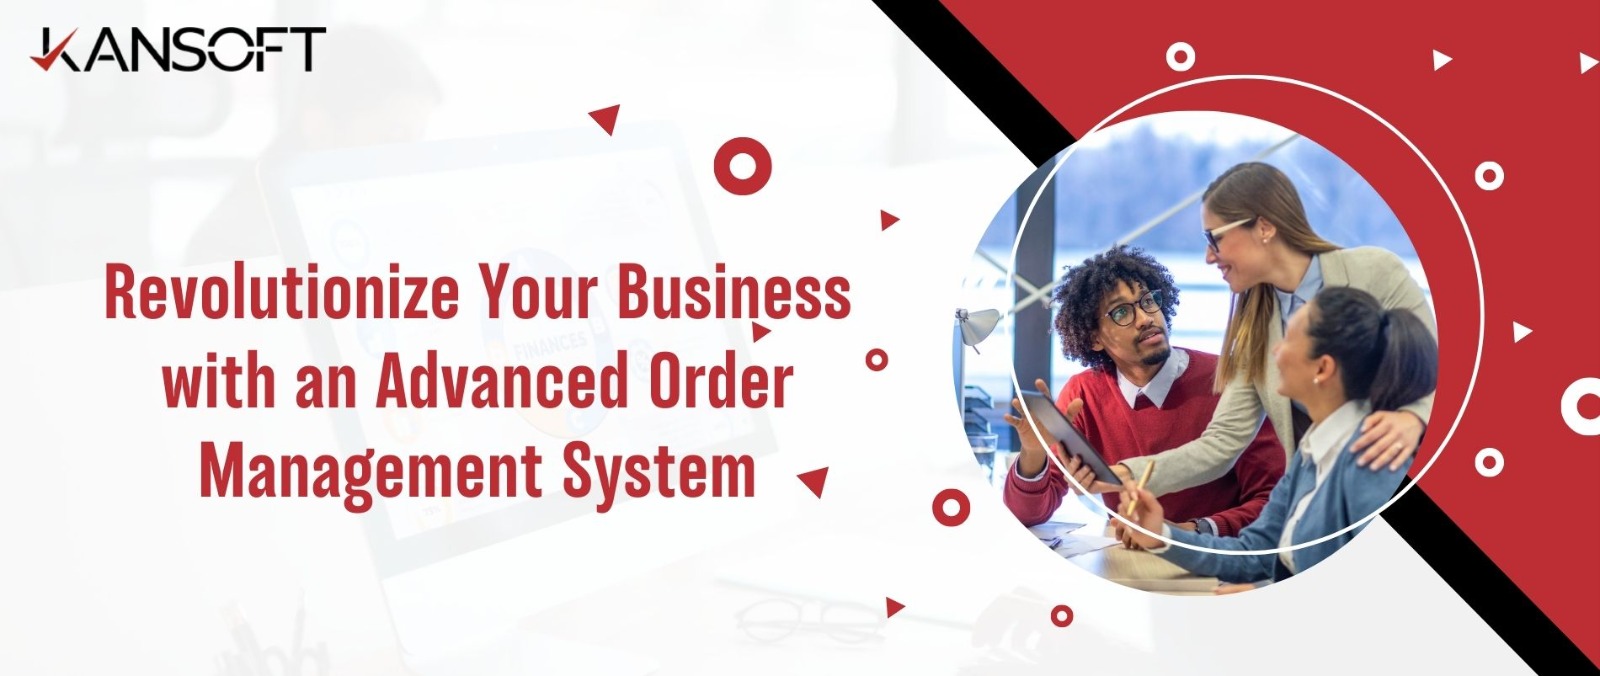 Revolutionize Your Business with an Advanced Order Management System